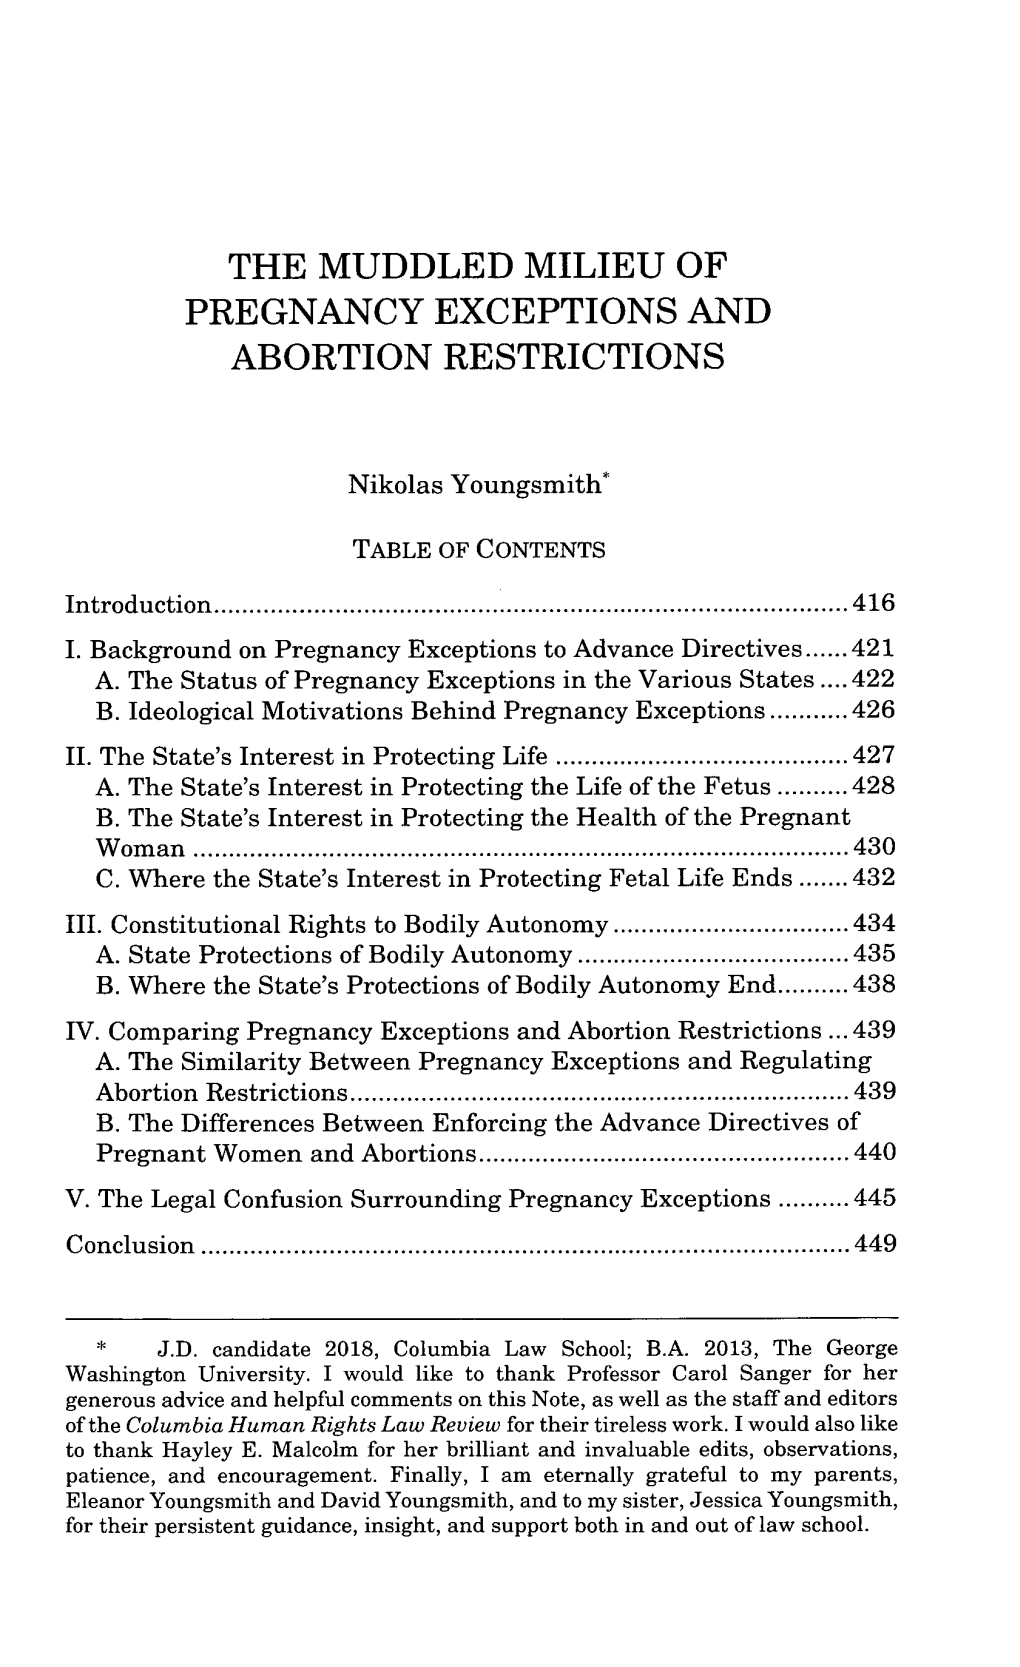 The Muddled Milieu of Pregnancy Exceptions and Abortion Restrictions